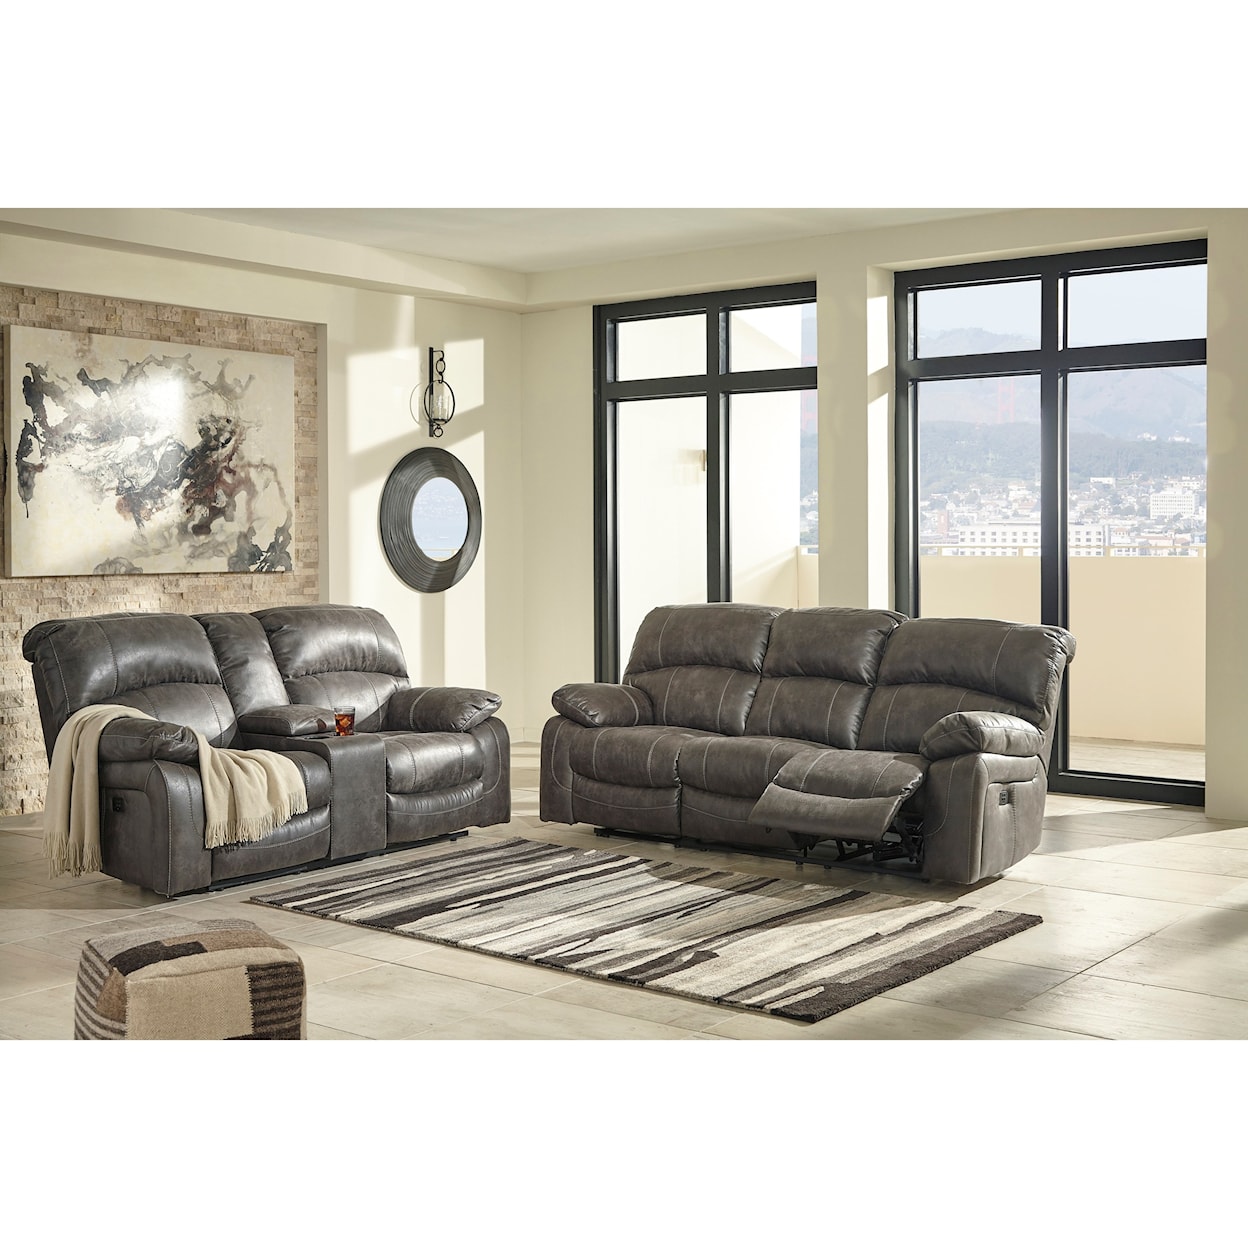 Signature Design by Ashley Dunwell Reclining Living Room Group